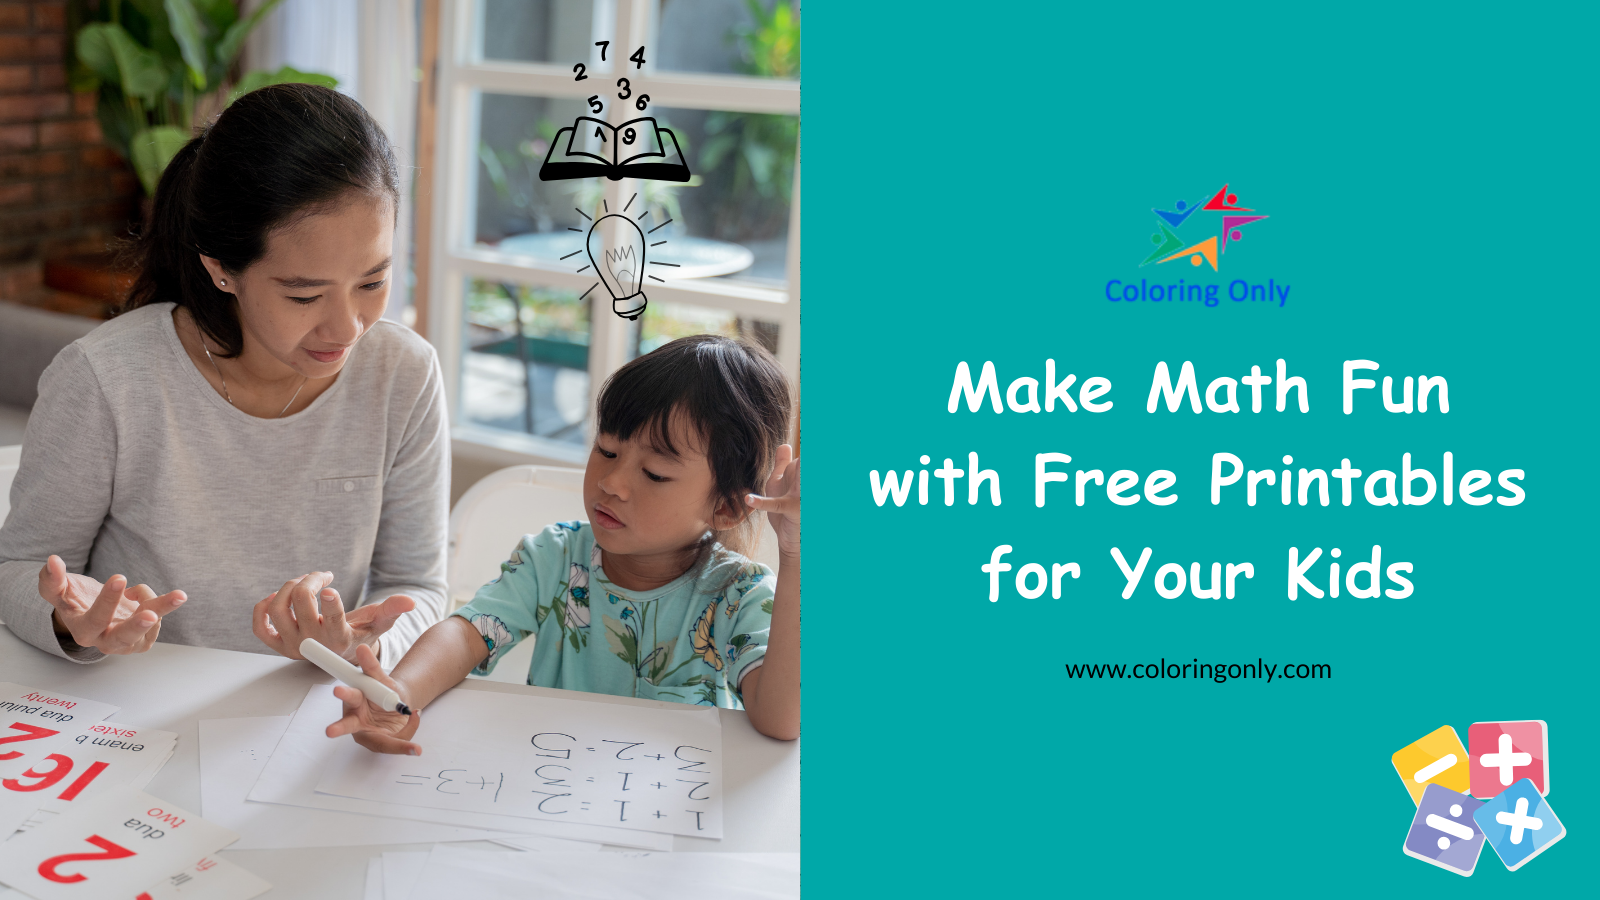 Make Math Fun with Free Printables for Your Kids